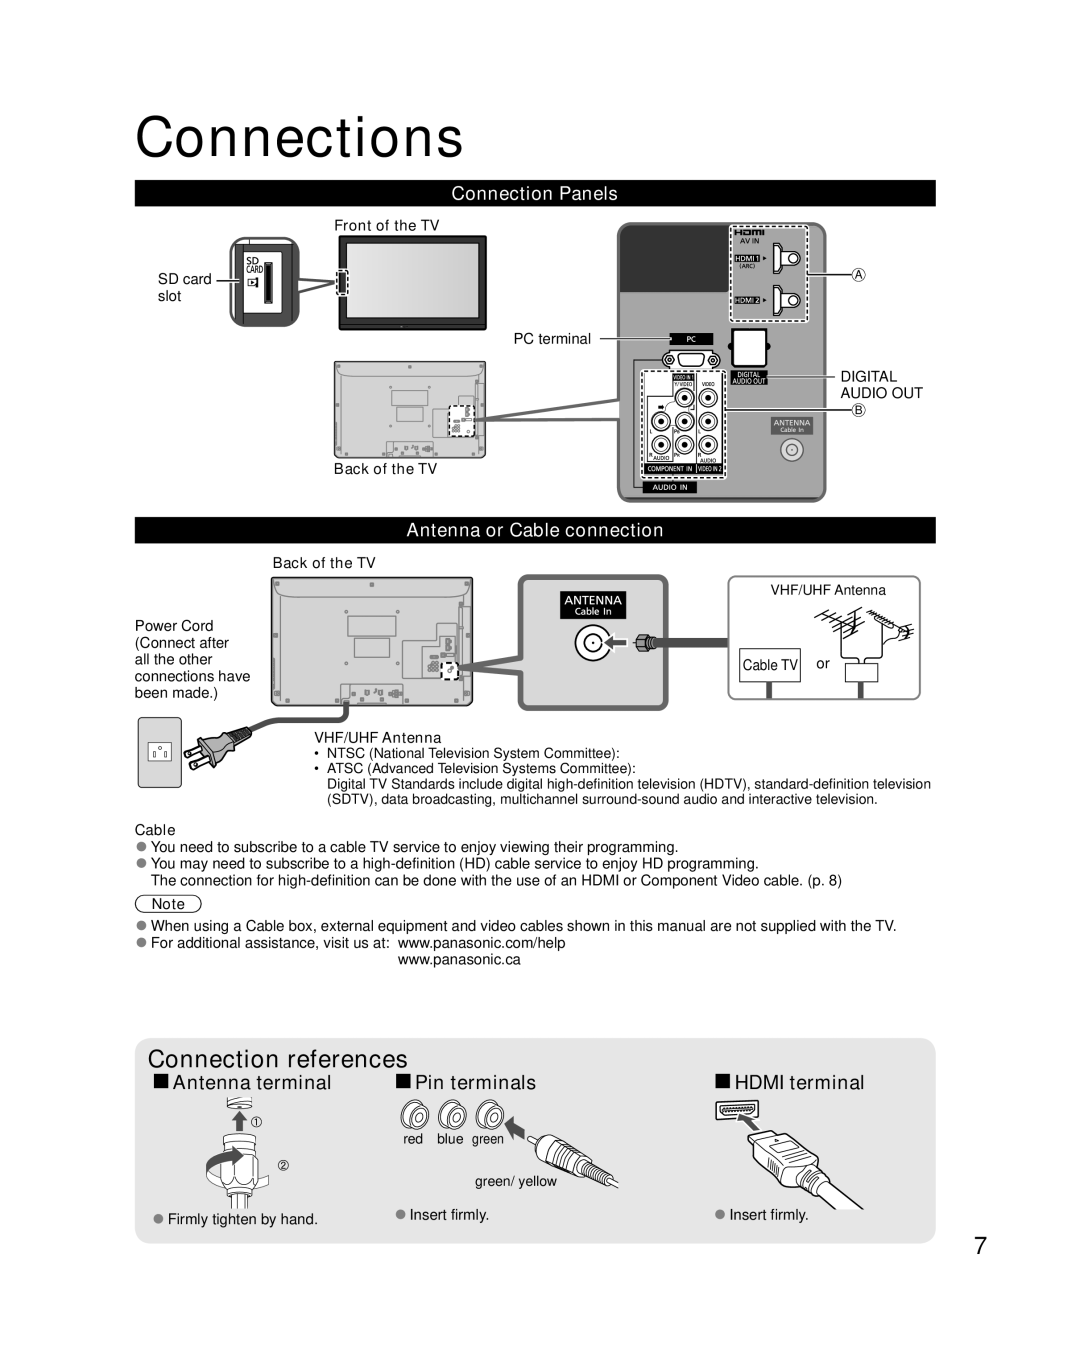 Panasonic TC-32LX34 owner manual Connections, Connection Panels, Antenna or Cable connection 